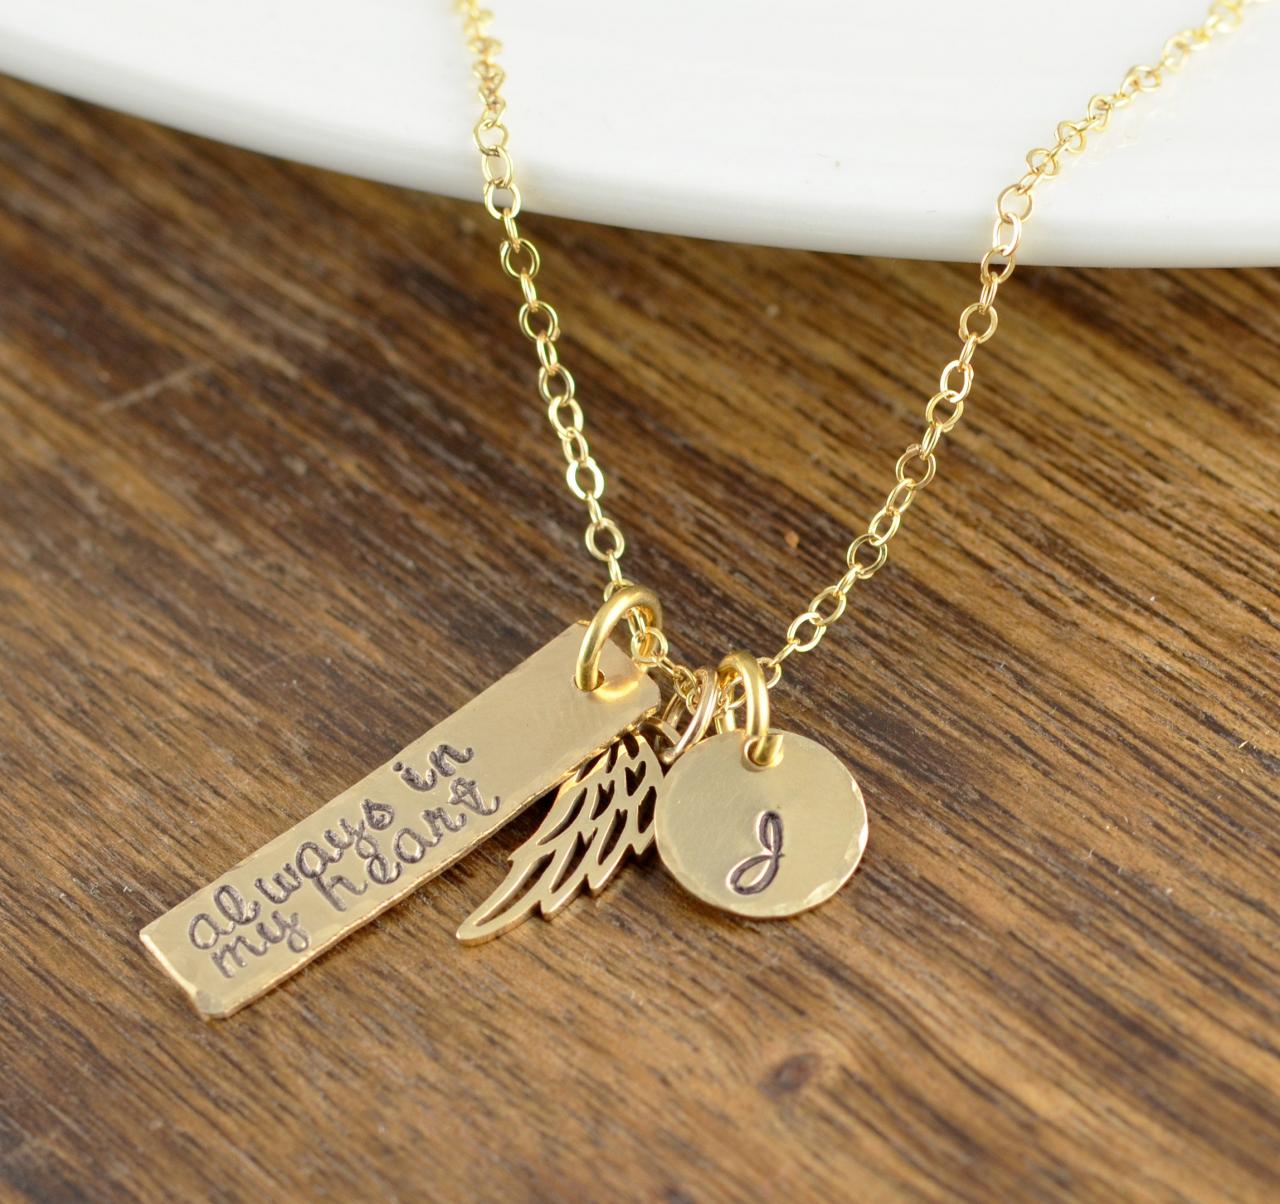 Always in my Heart, Gold Initial Necklace, Personalized Angel Wing Necklace, Memorial Necklace, Memorial Jewelry, Remembrance Gifts